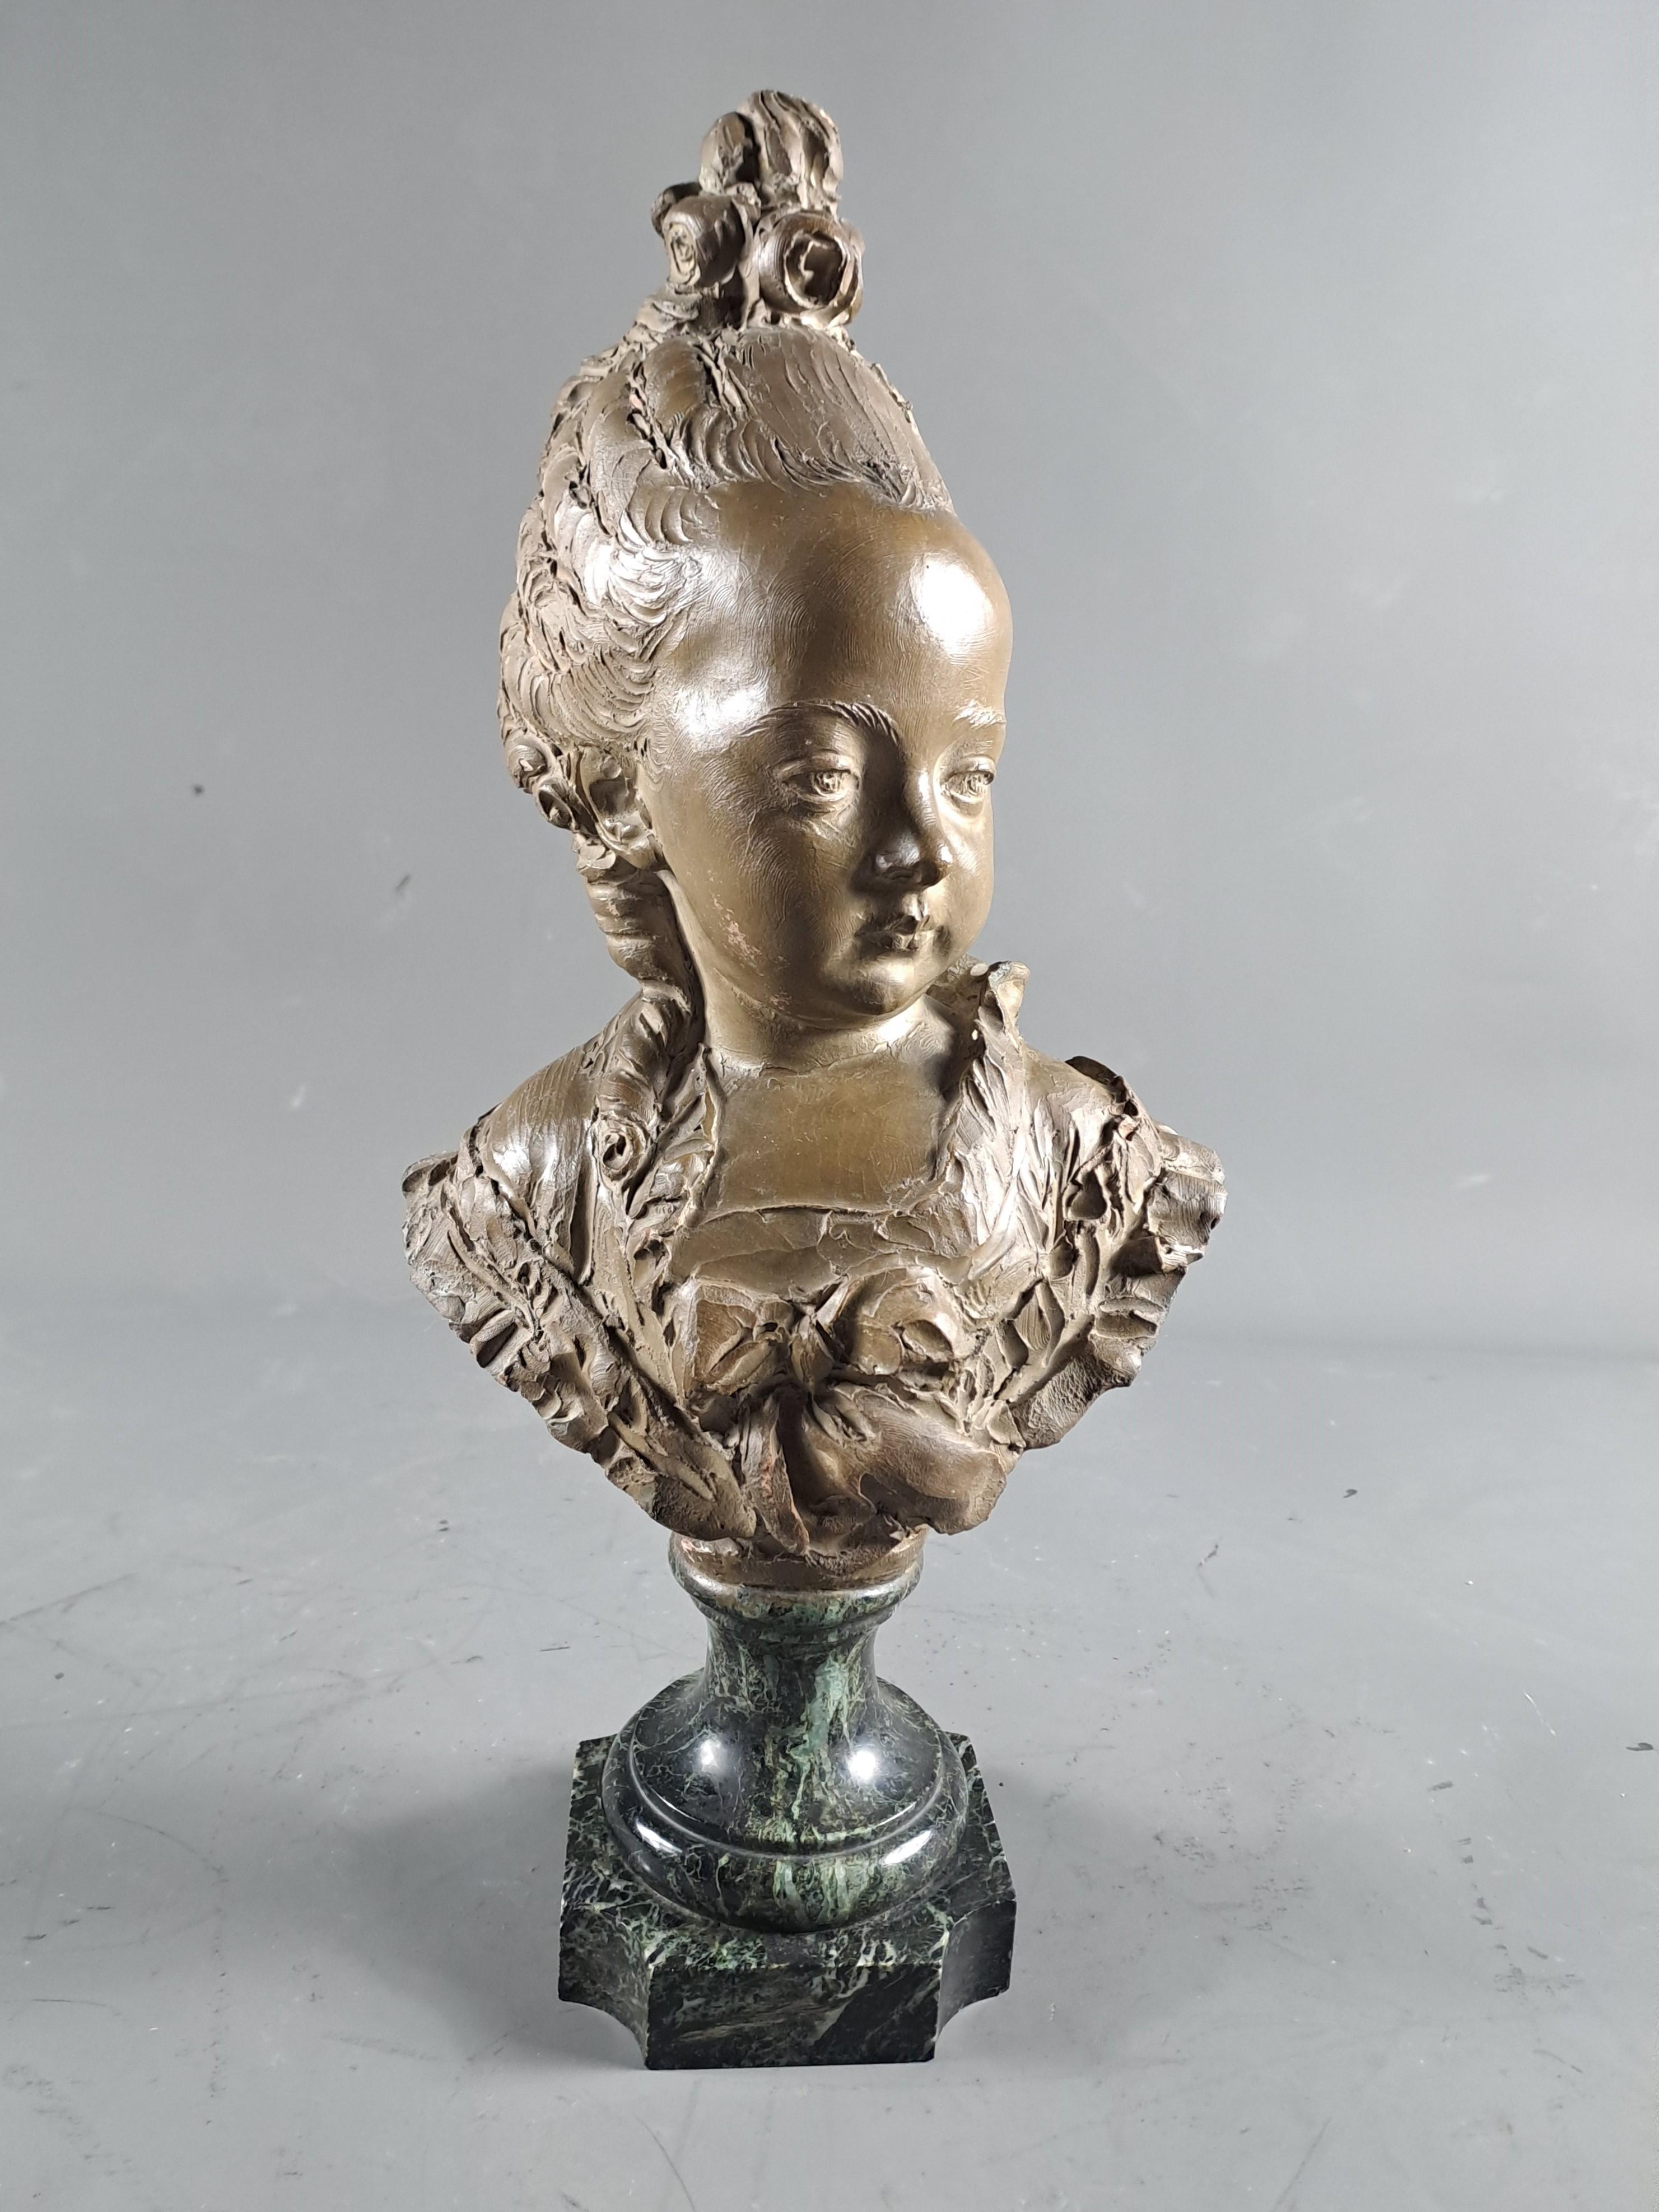 Fernand Cian (1889-1954)

Bust of an elegant young woman wearing a bun, in the style of the 18th century.

Patinated terracotta on a sea green marble piedouche base.

Signed Fernand Cian on the back.

Very good condition